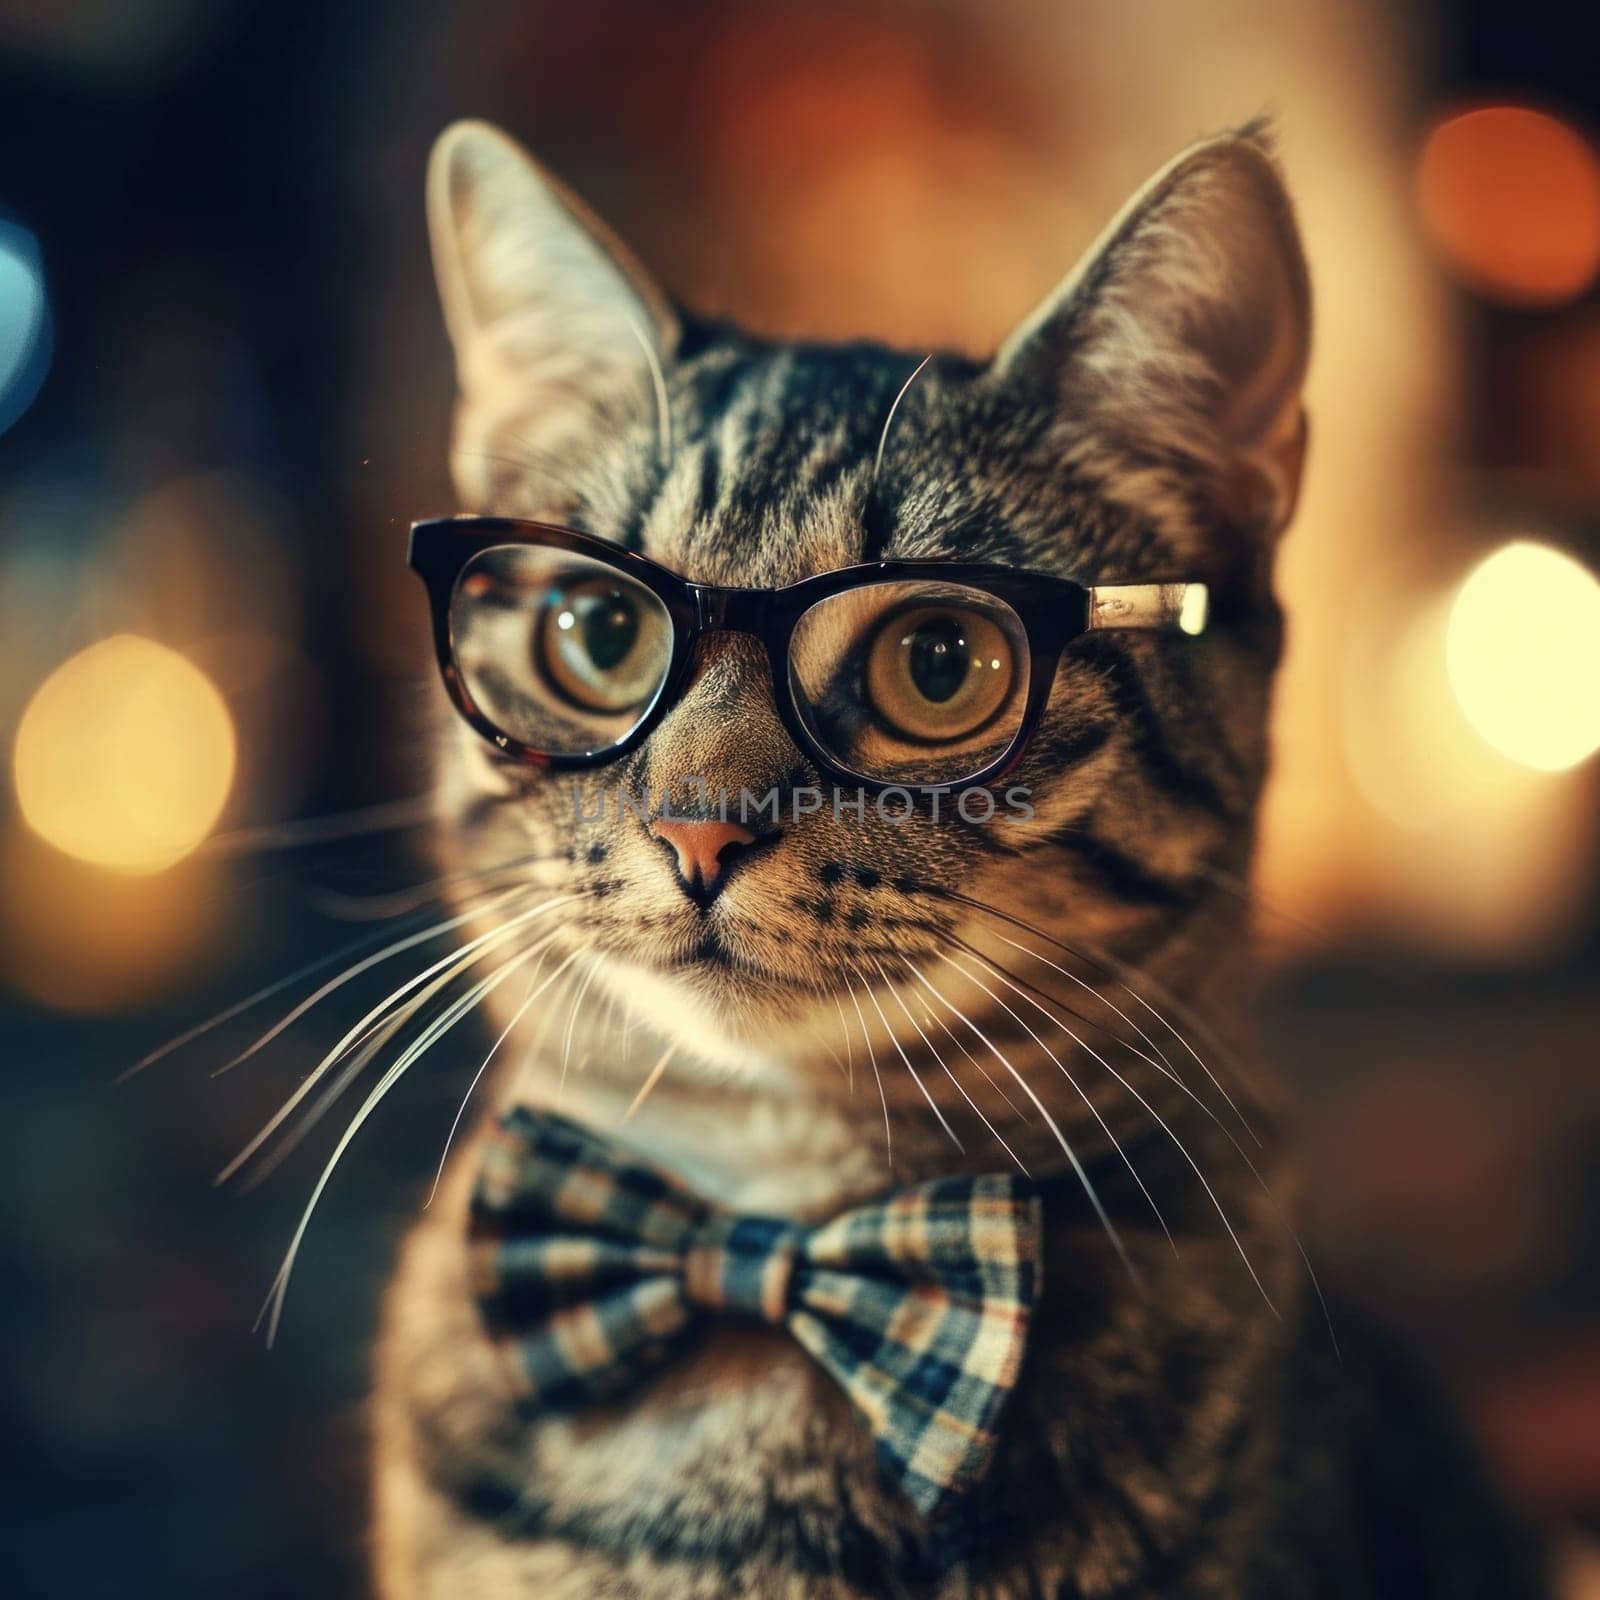 A cat wearing glasses and a bow tie sitting down